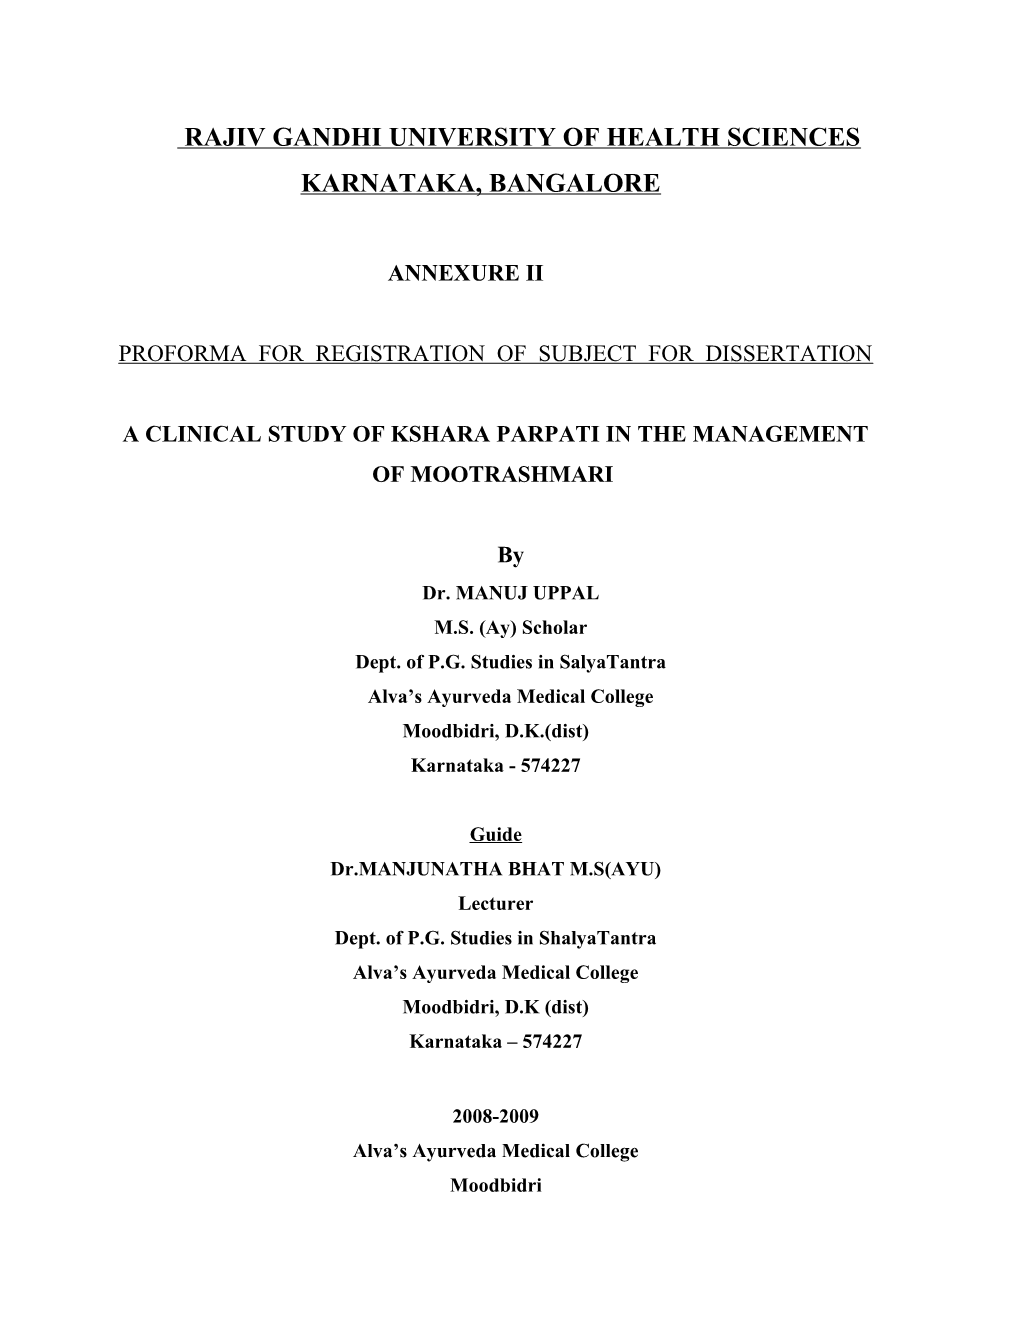 A Clinical Study of Kshara Parpati in the Management of Mootrashmari